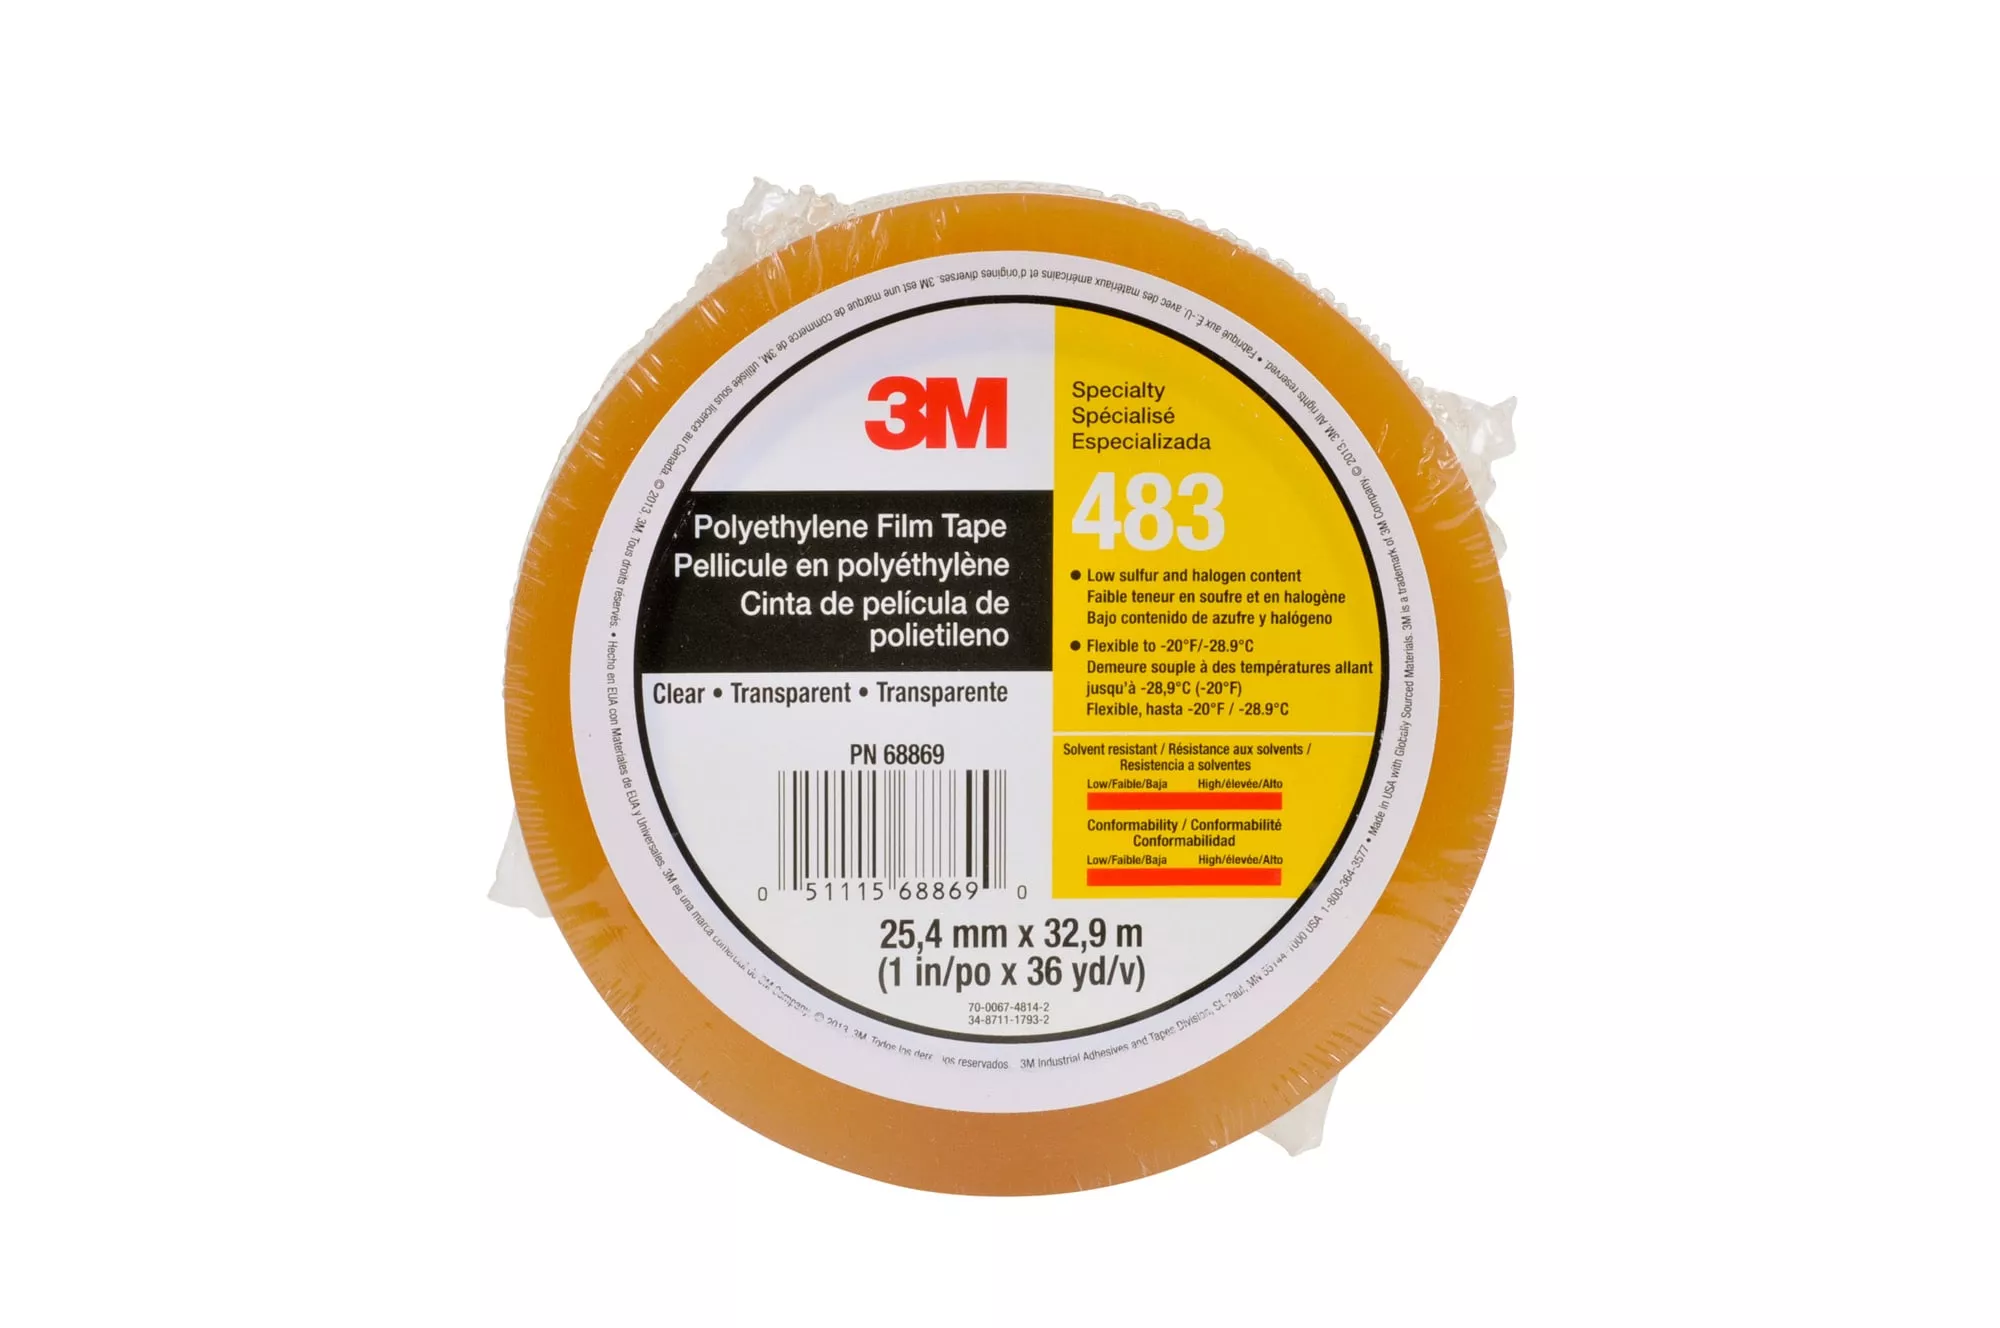 3M™ Polyethylene Tape 483, Transparent, 1 in x 36 yd, 5.0 mil, 36
Roll/Case, Individually Wrapped Conveniently Packaged